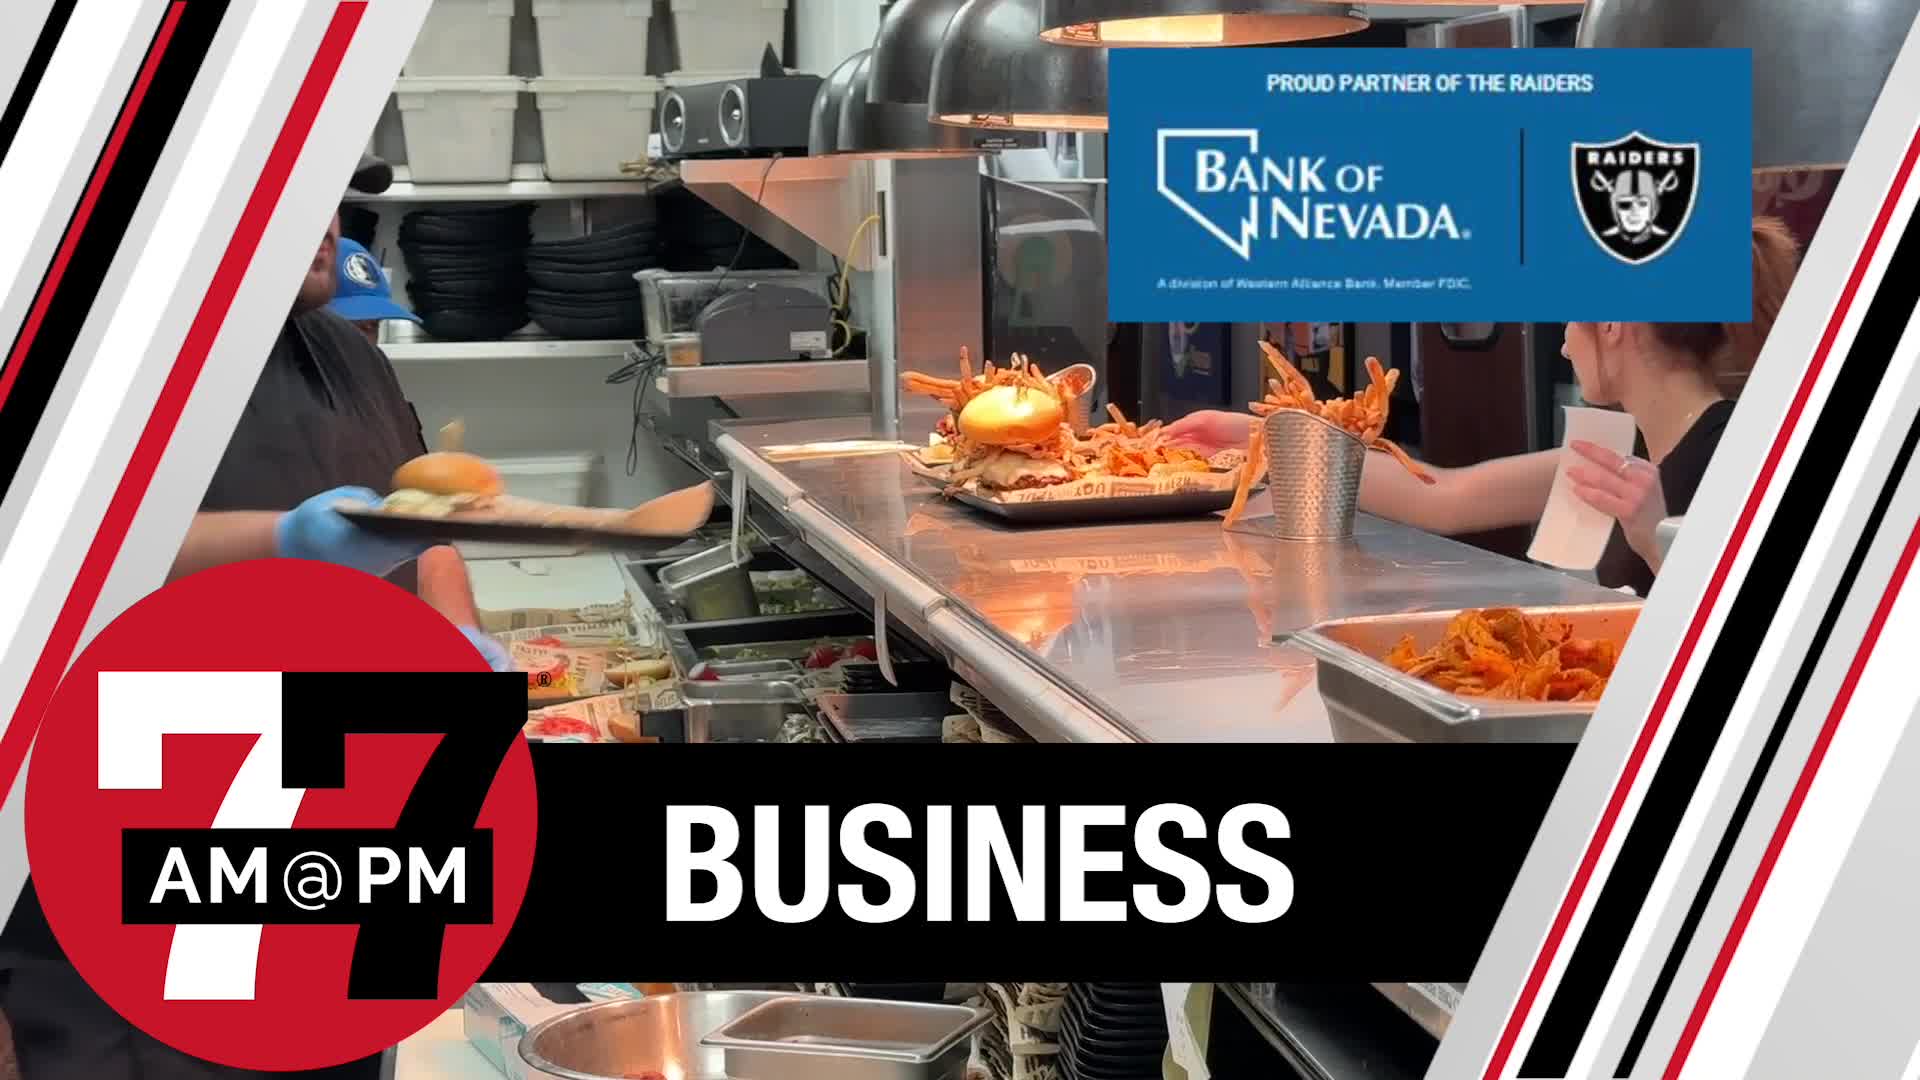 Nevada’s hospitality sector hit hard by ‘Great Resignation’